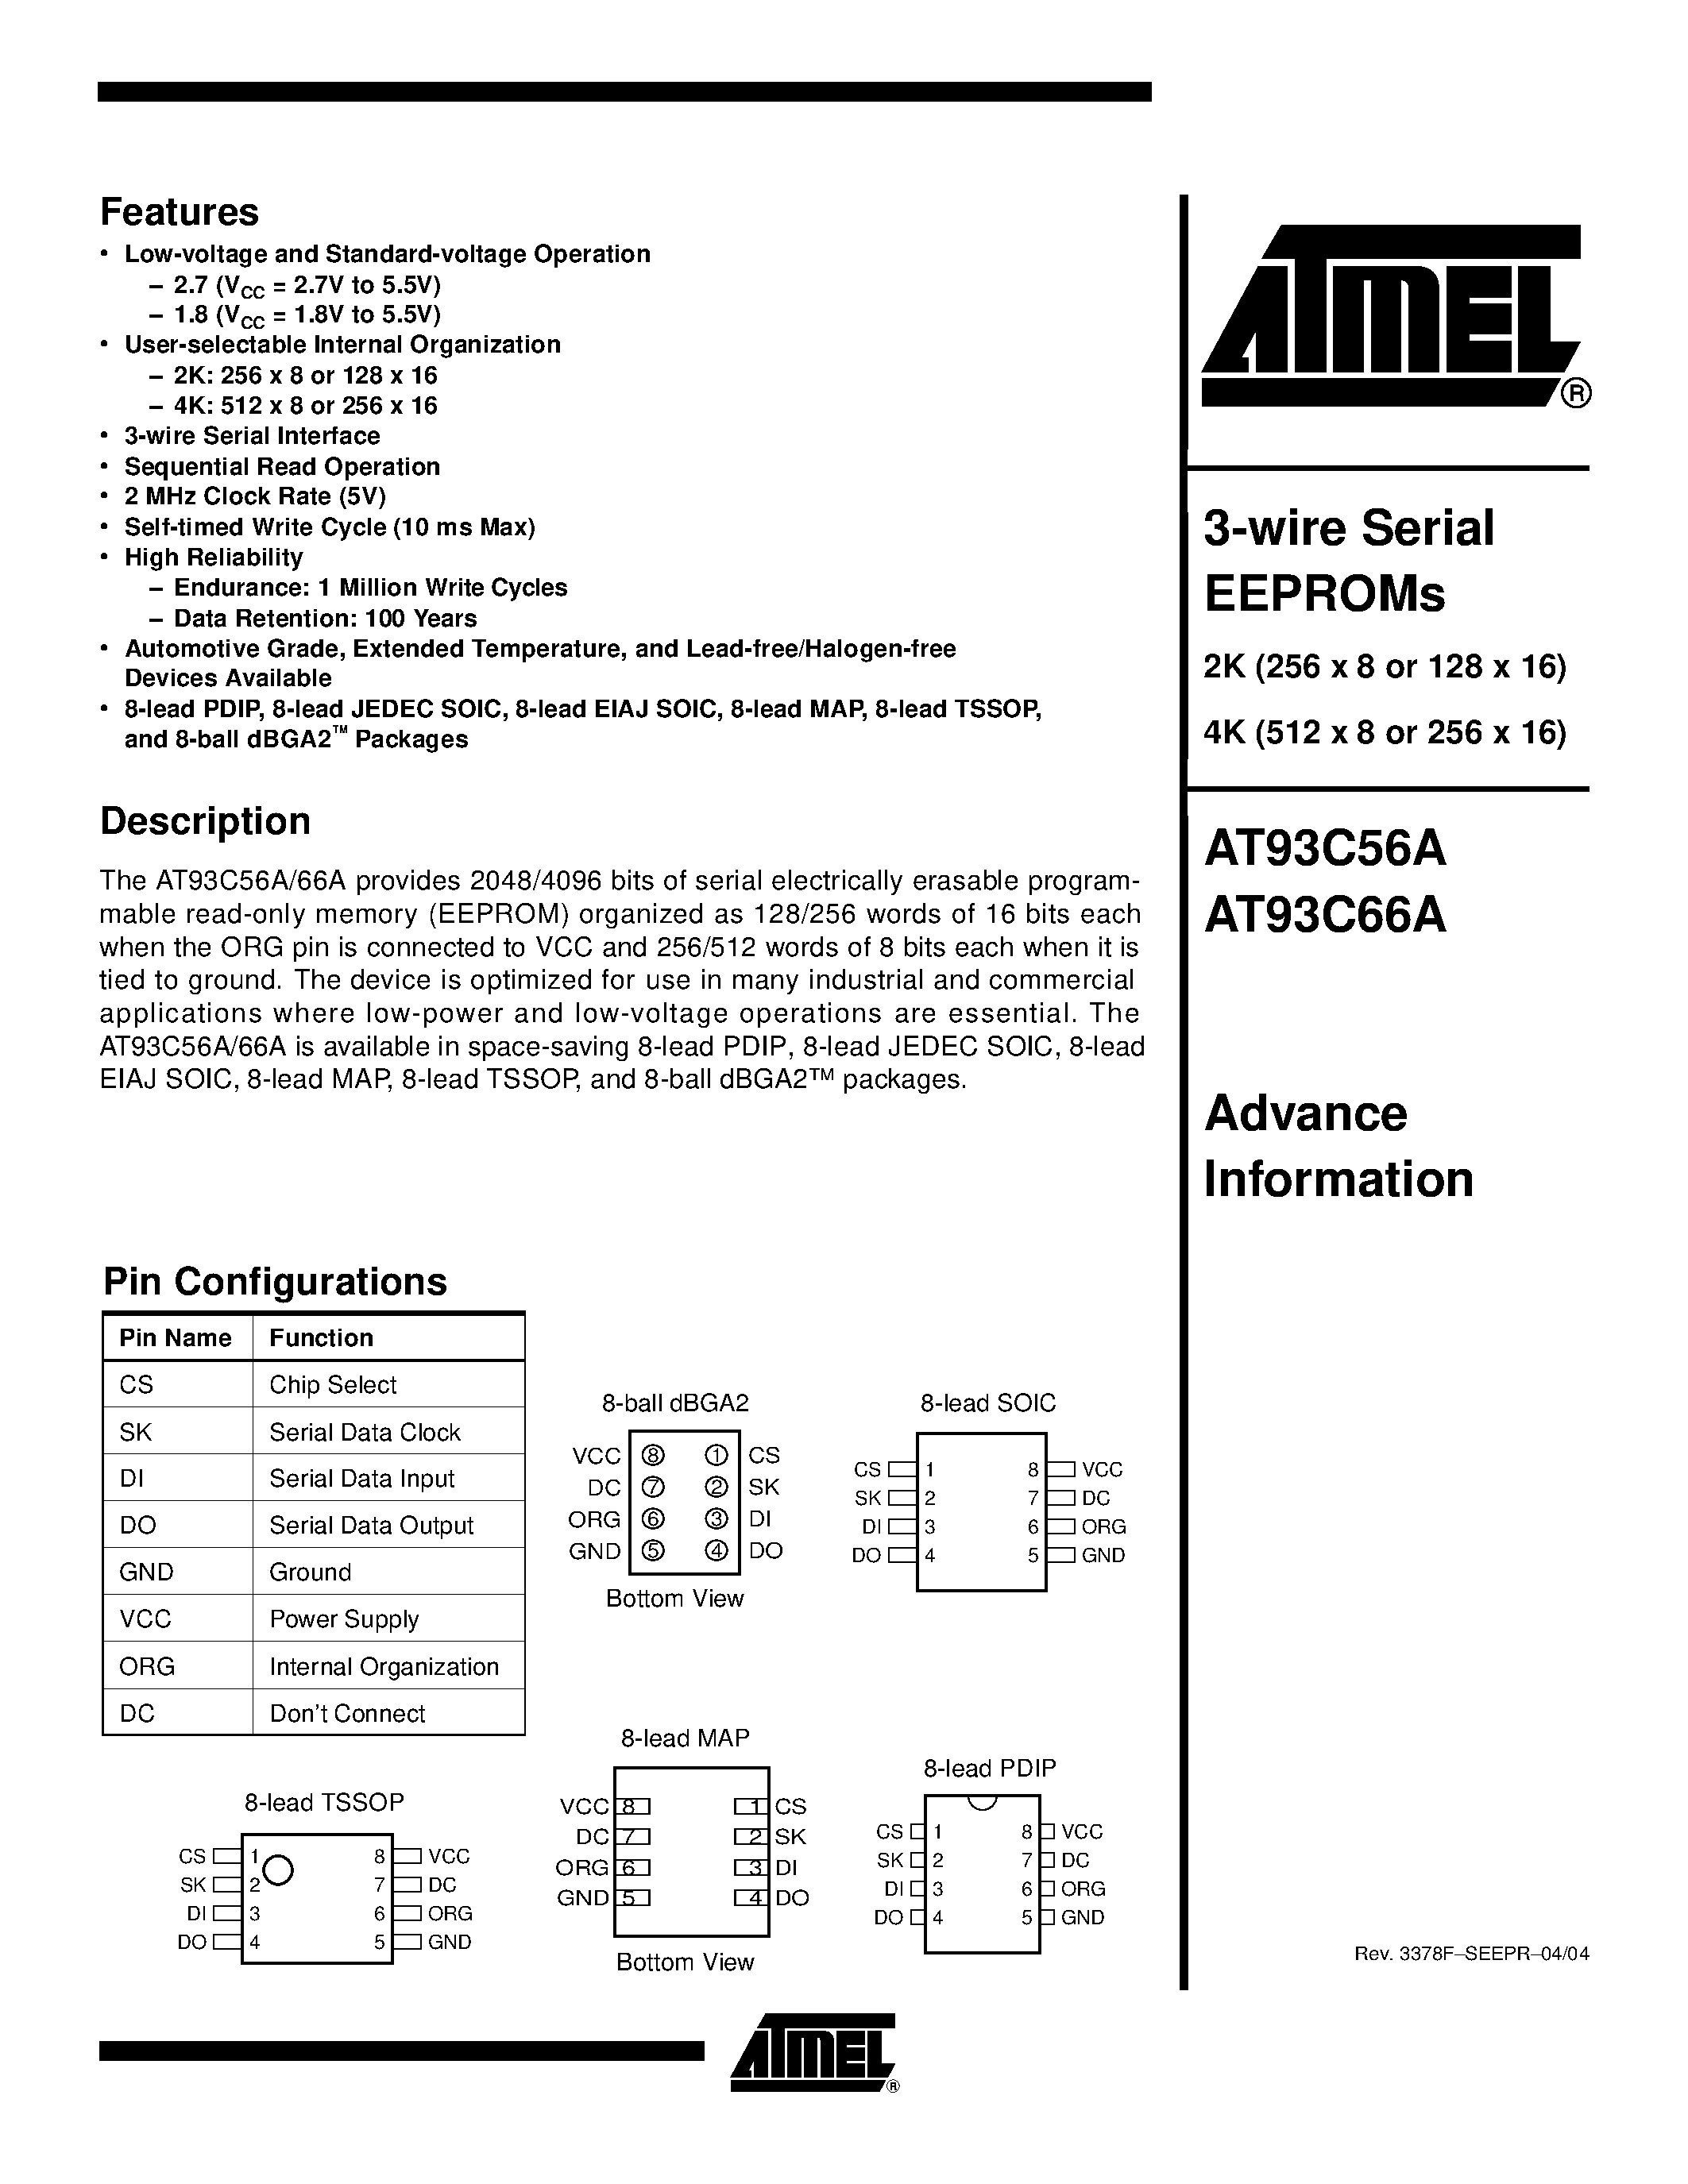 Datasheet AT93C66A-10TU-1.8 - 3-wire Serial EEPROMs 2K (256 x 8 or 128 x 16) page 1